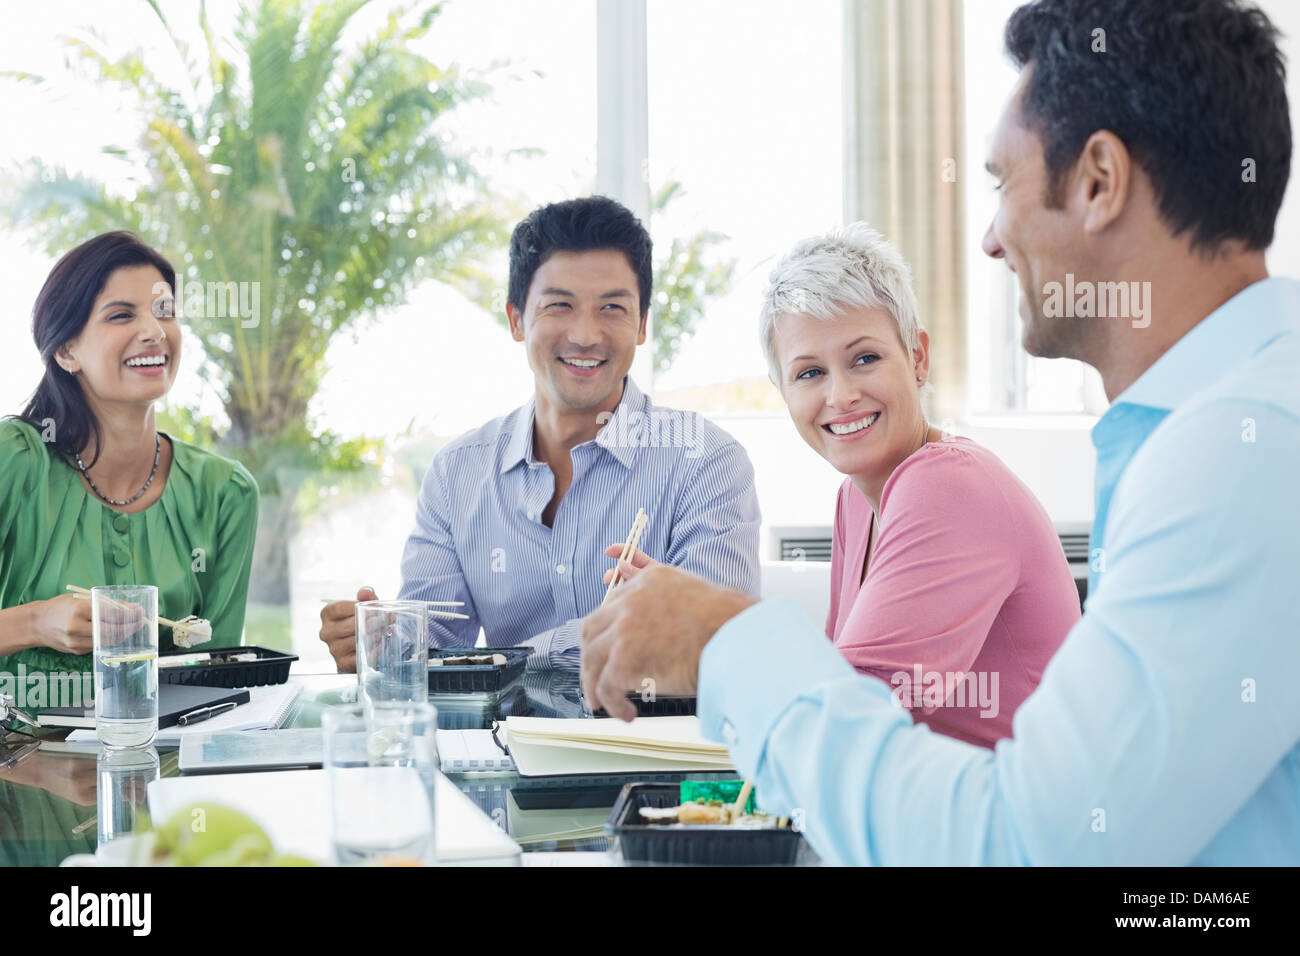 Business people smiling in lunch meeting Stock Photo